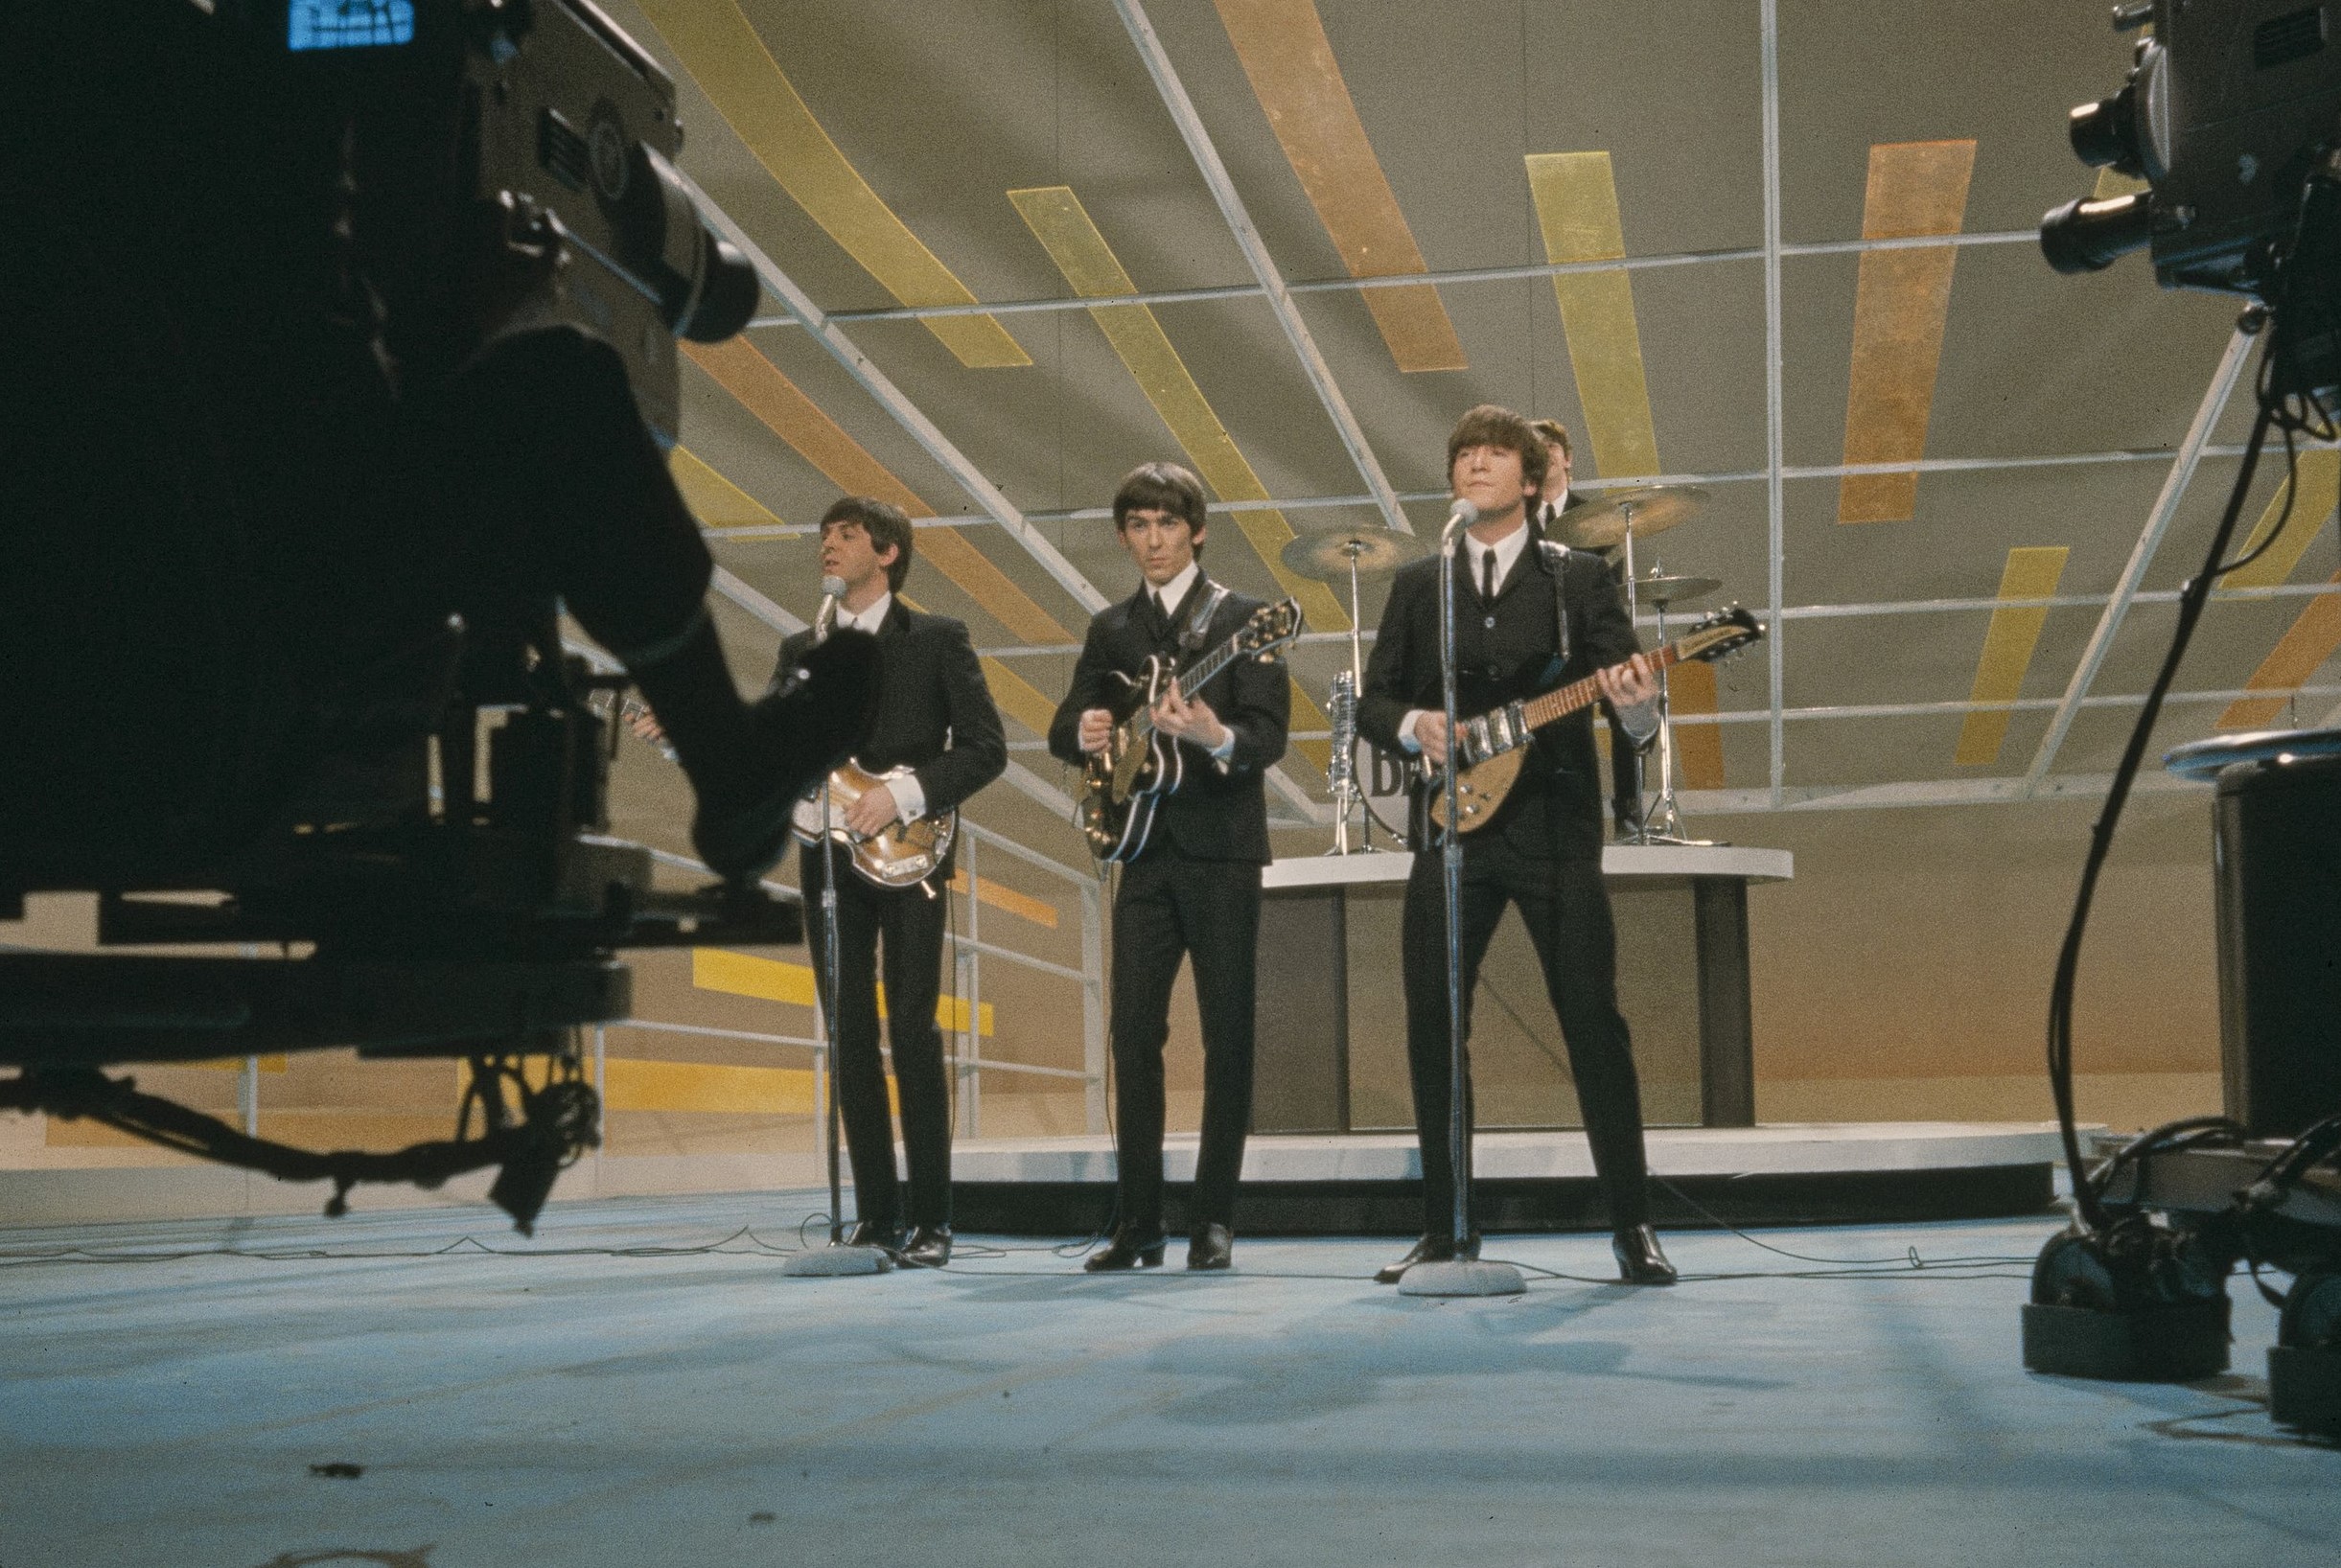 The Beatles, making their much-mythologized February 9, 1964, appearance on The Ed Sullivan Show.